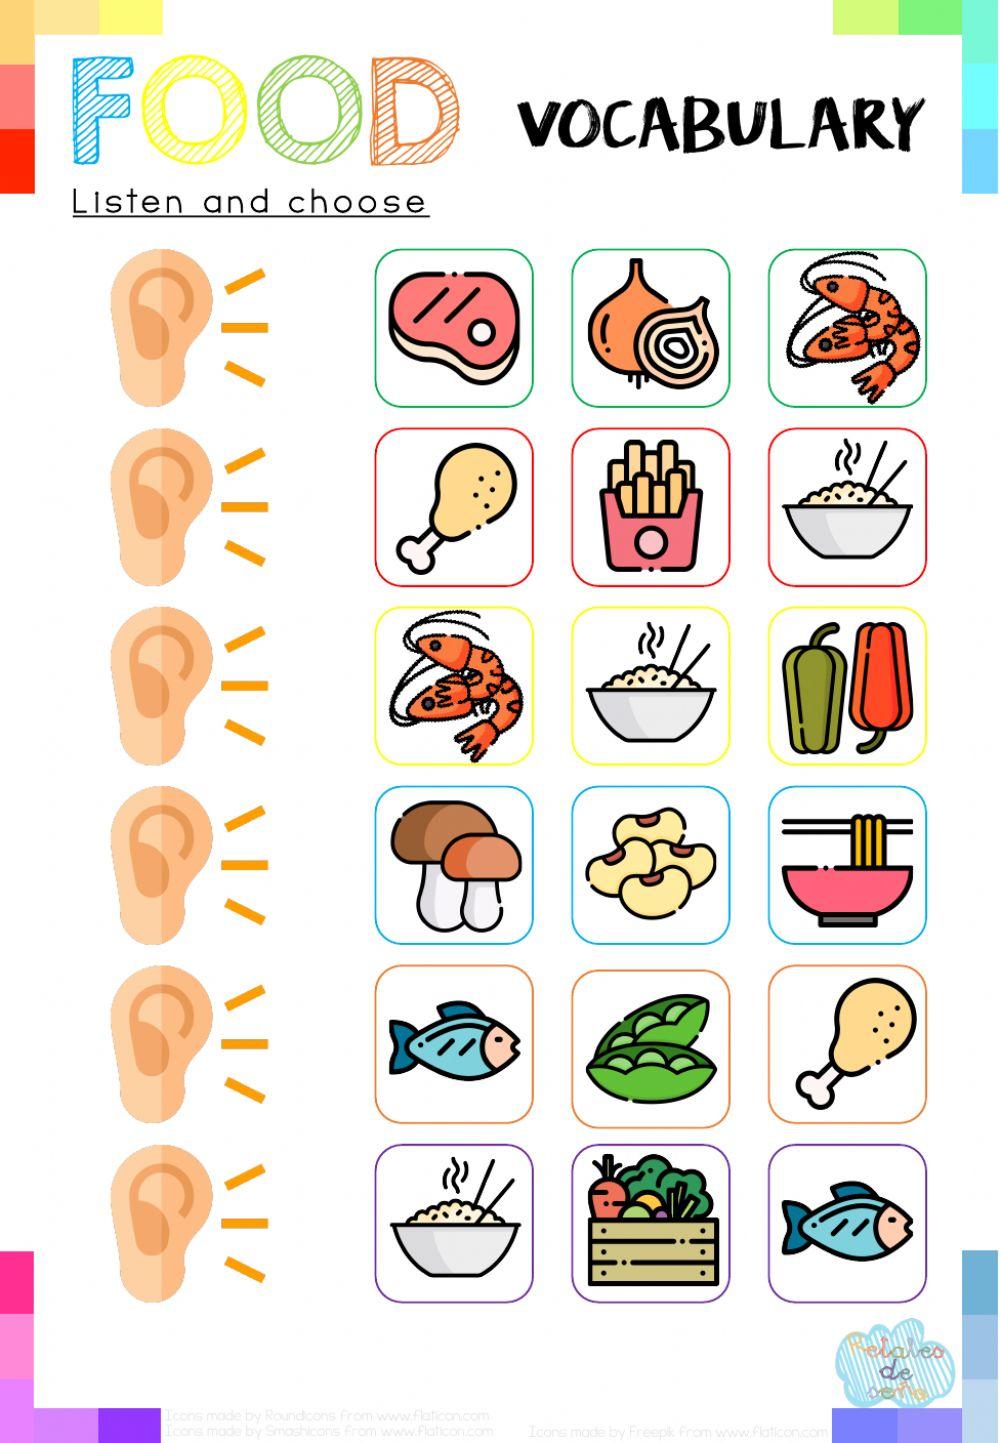 Listen and choose: Vocabulary food